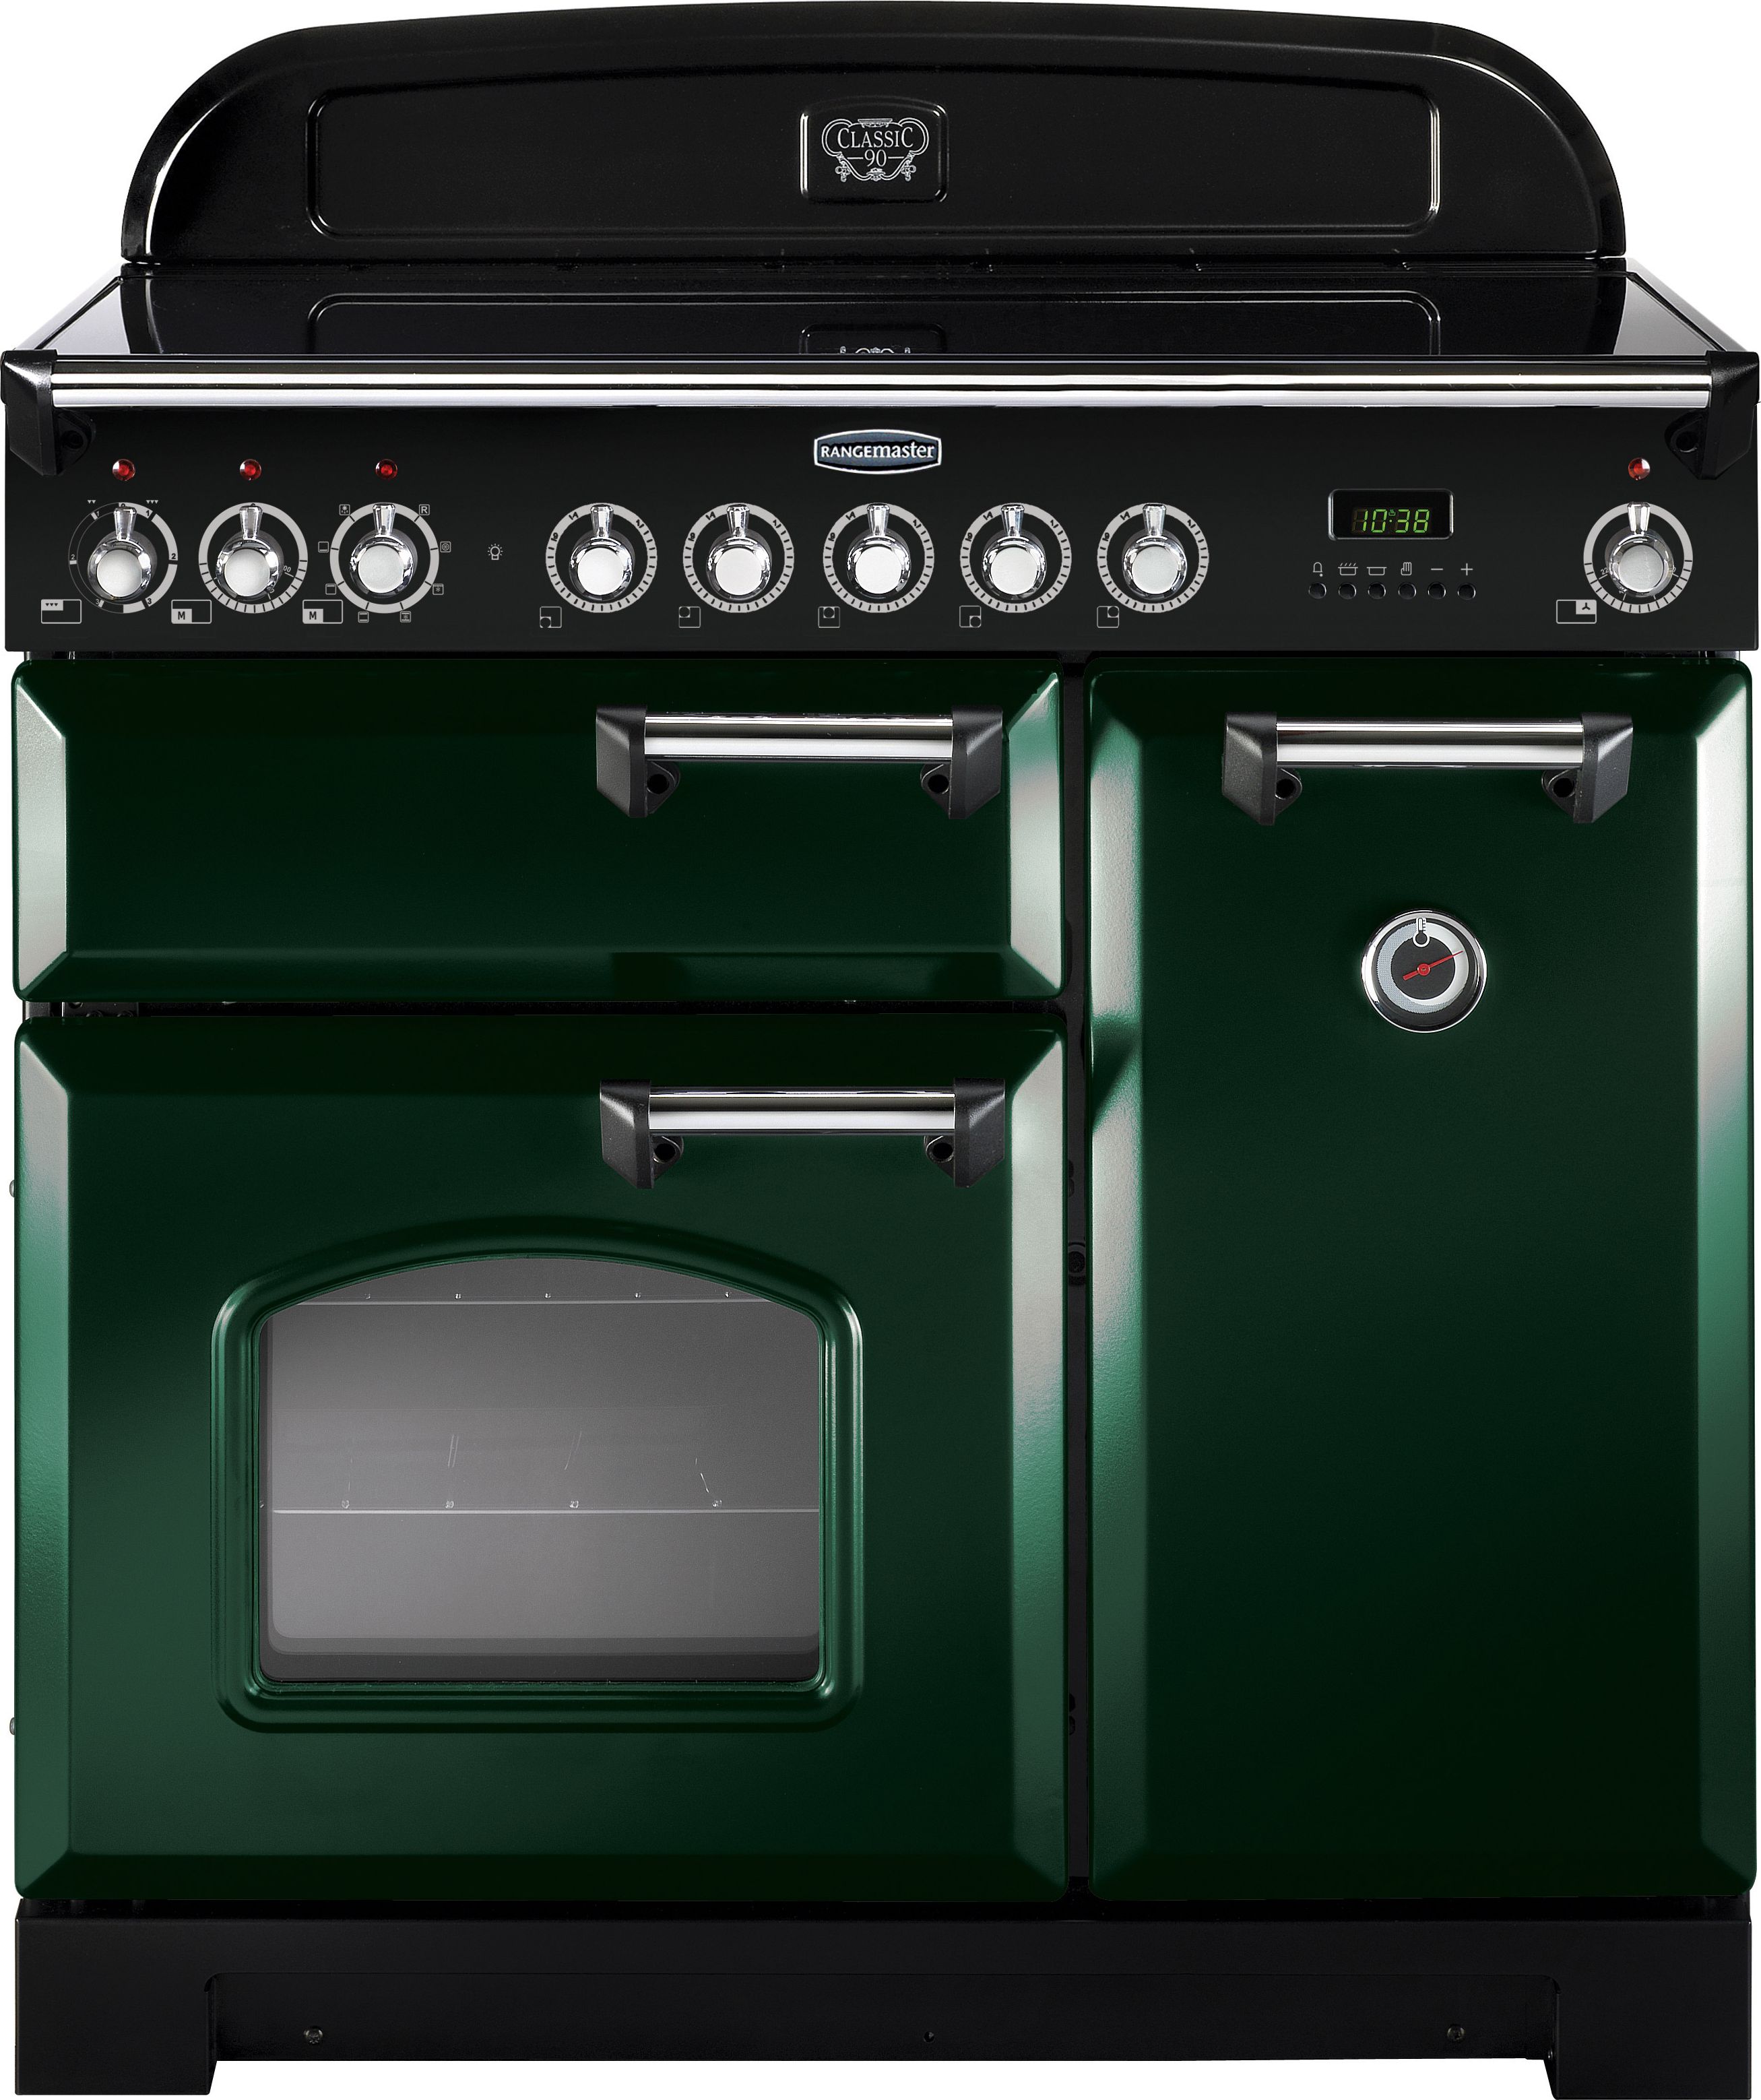 Rangemaster Classic Deluxe CDL90ECRG/C 90cm Electric Range Cooker with Ceramic Hob - Racing Green / Chrome - A/A Rated, Green